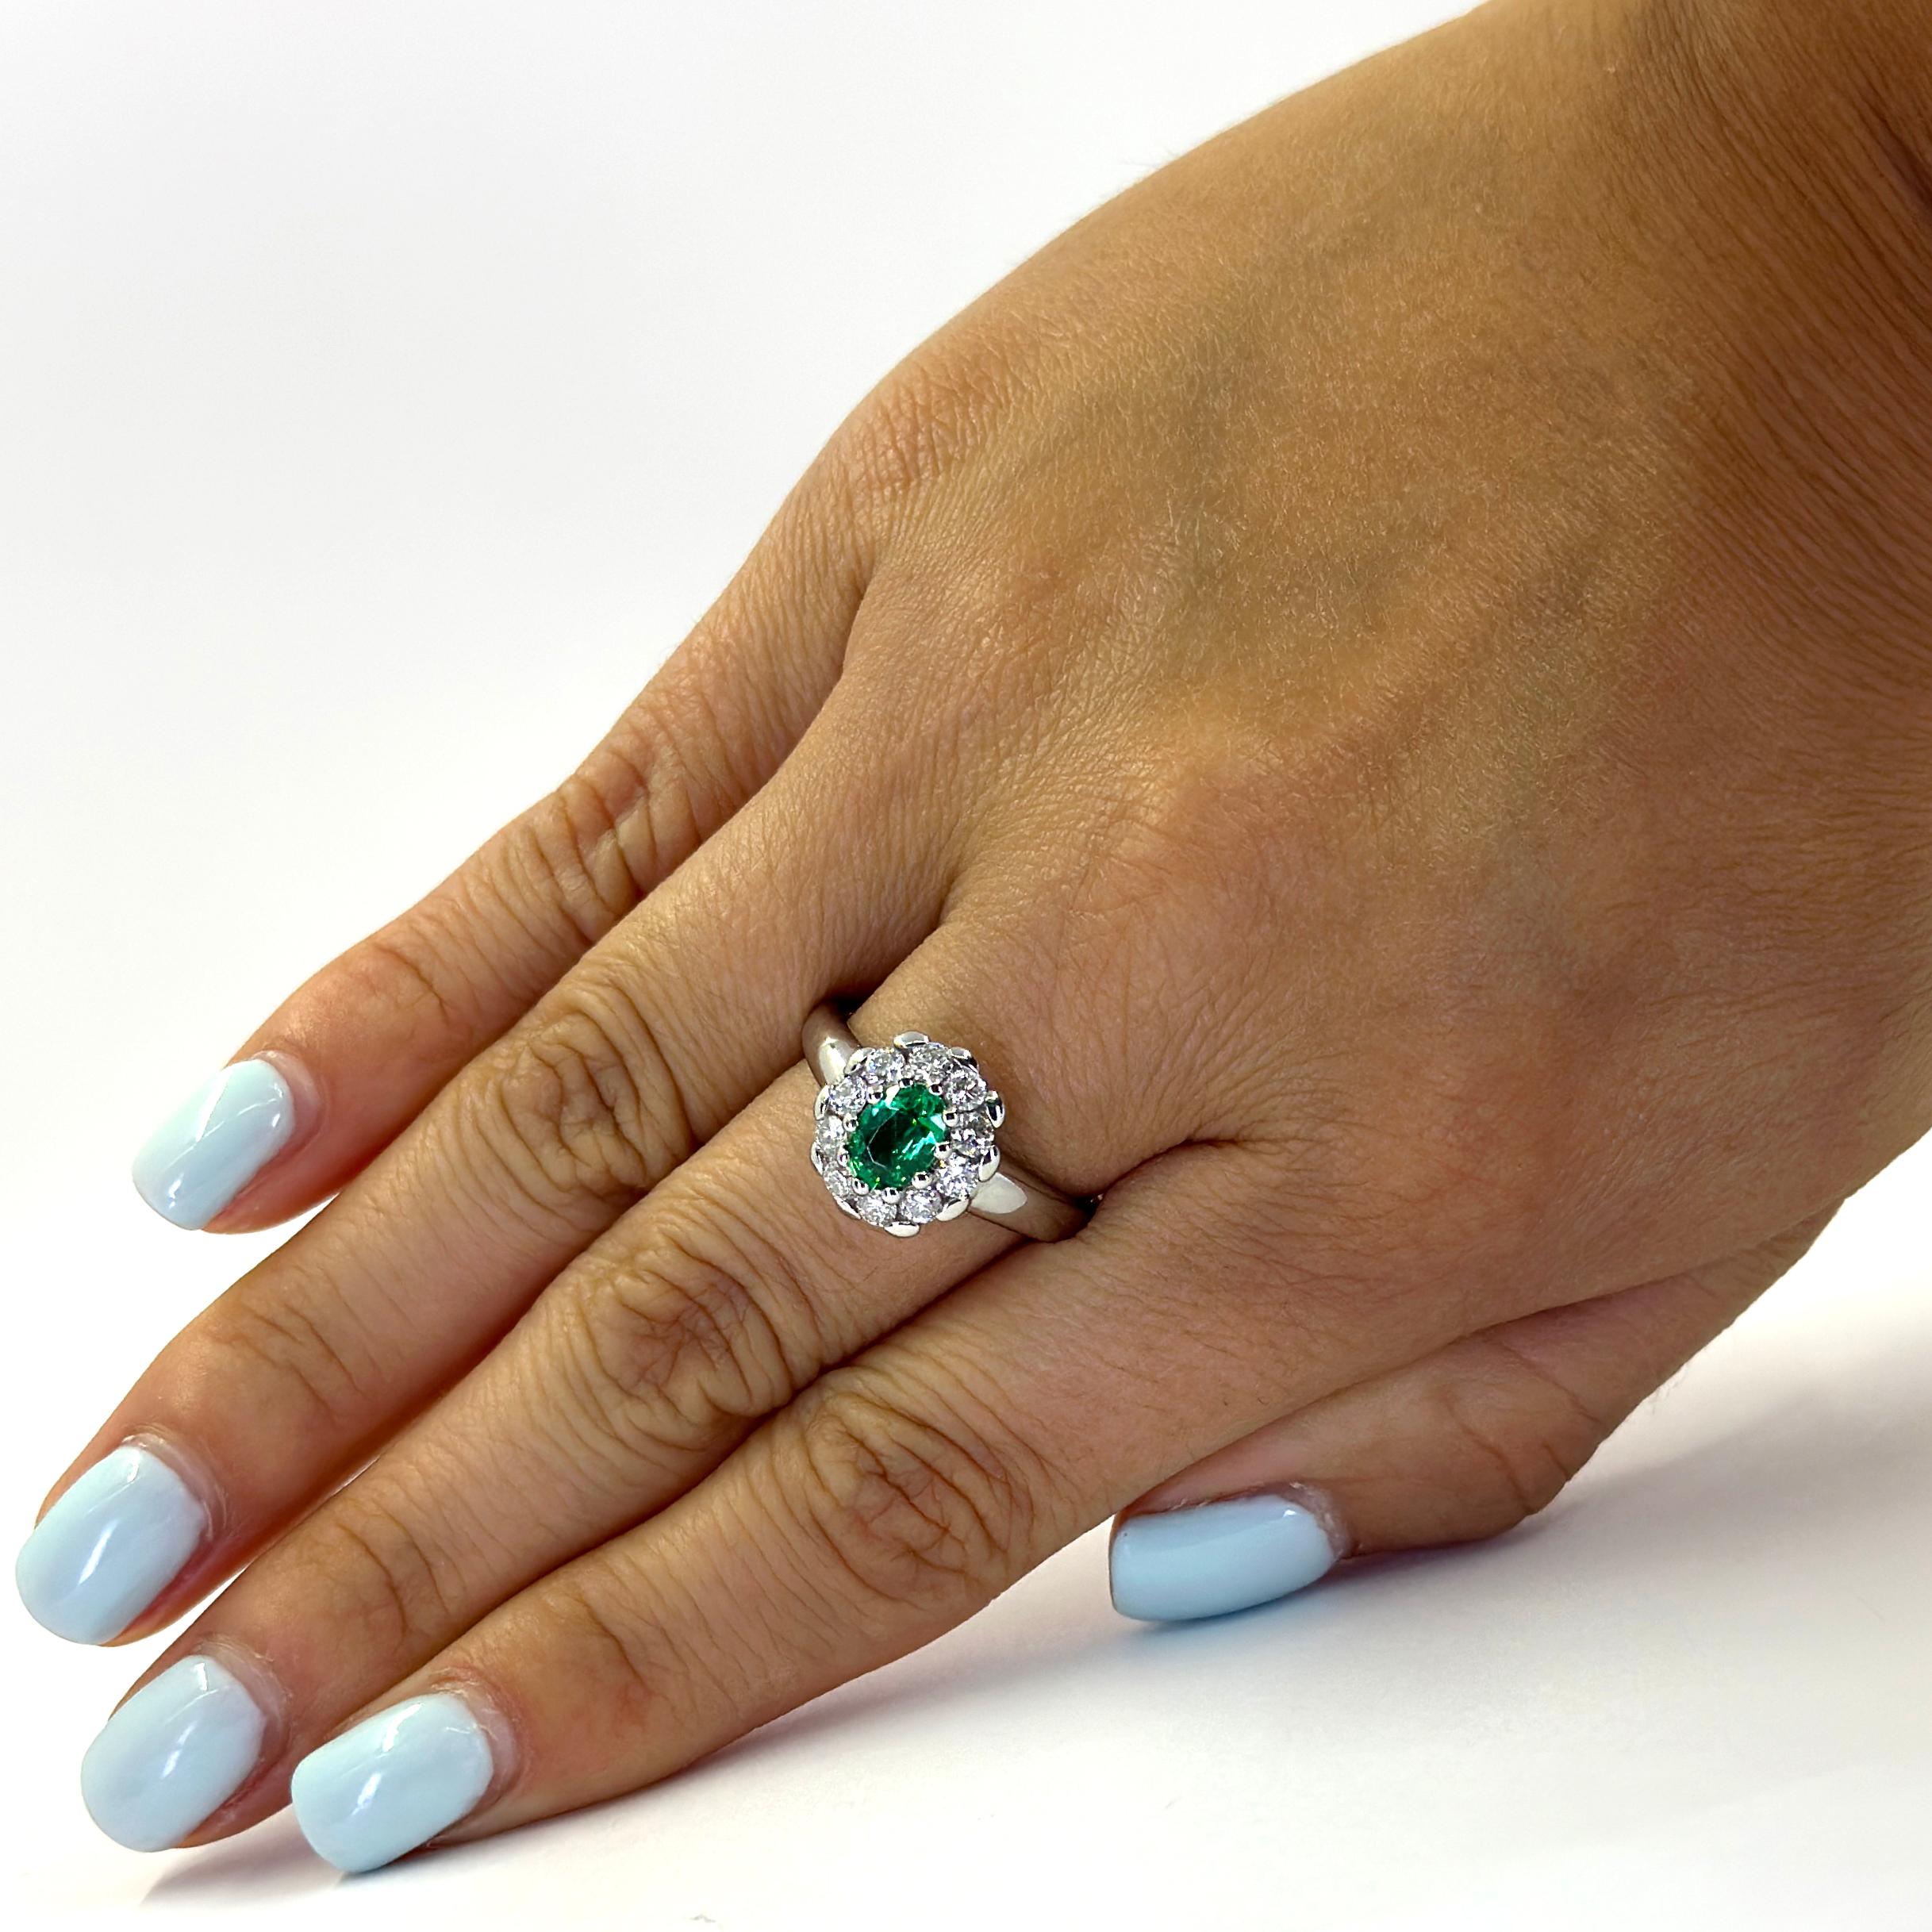 18 Karat White Gold Ring Featuring A Prong Set Oval Emerald Weighing Approximately 0.70 Carats Accented By 10 Prong Set Diamonds of VS Clarity and G Color Totaling Approximately 0.60 Carats. Finger Size 8.5; Purchase Includes One Sizing Service Upon